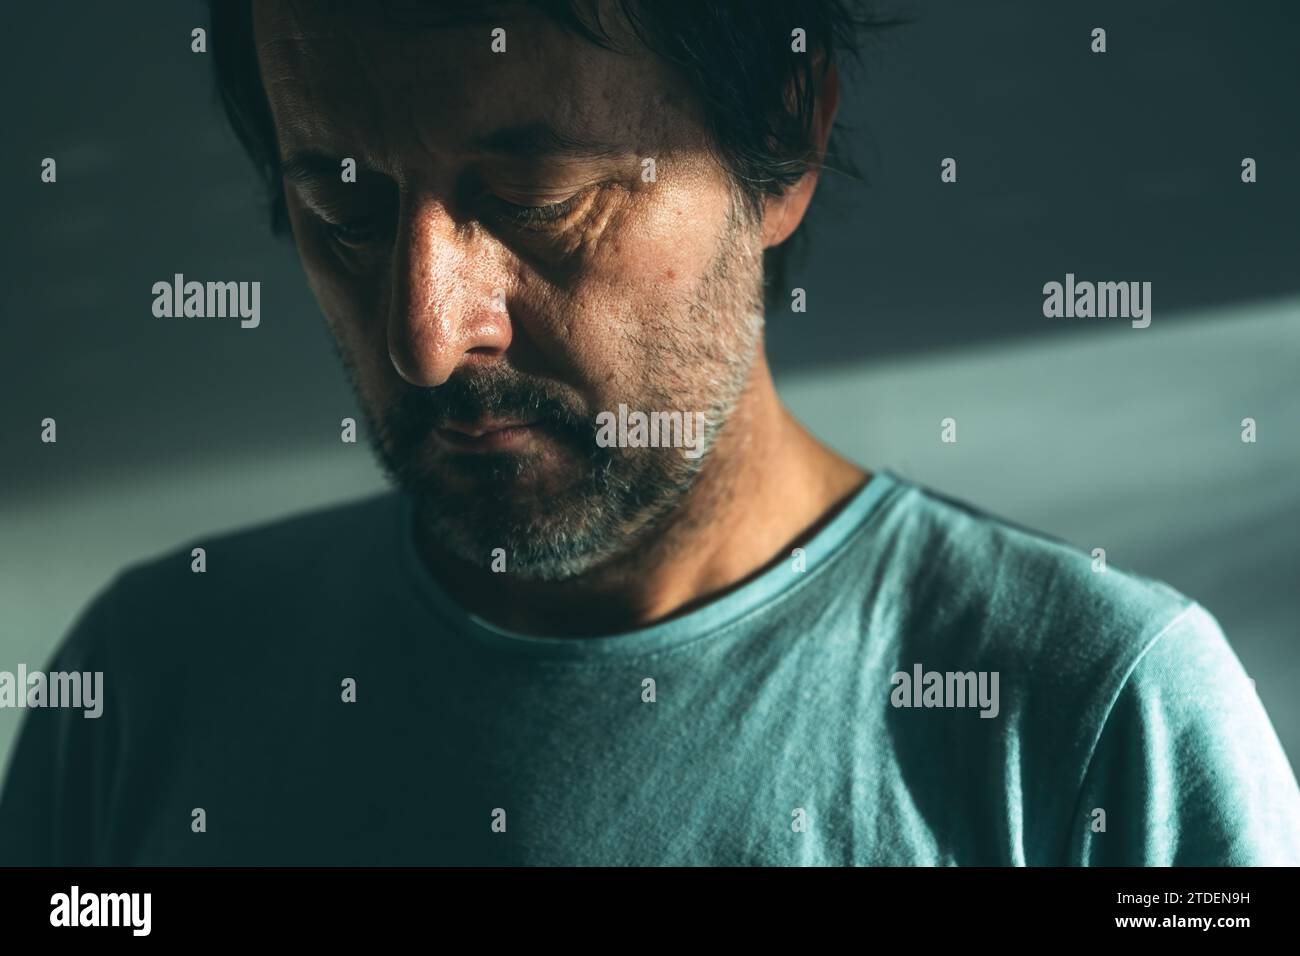 Midlife crisis of middle aged man. Closeup portrait of man in 40s in a depressed state of mind, sad and hopeless. Selective focus. Stock Photo